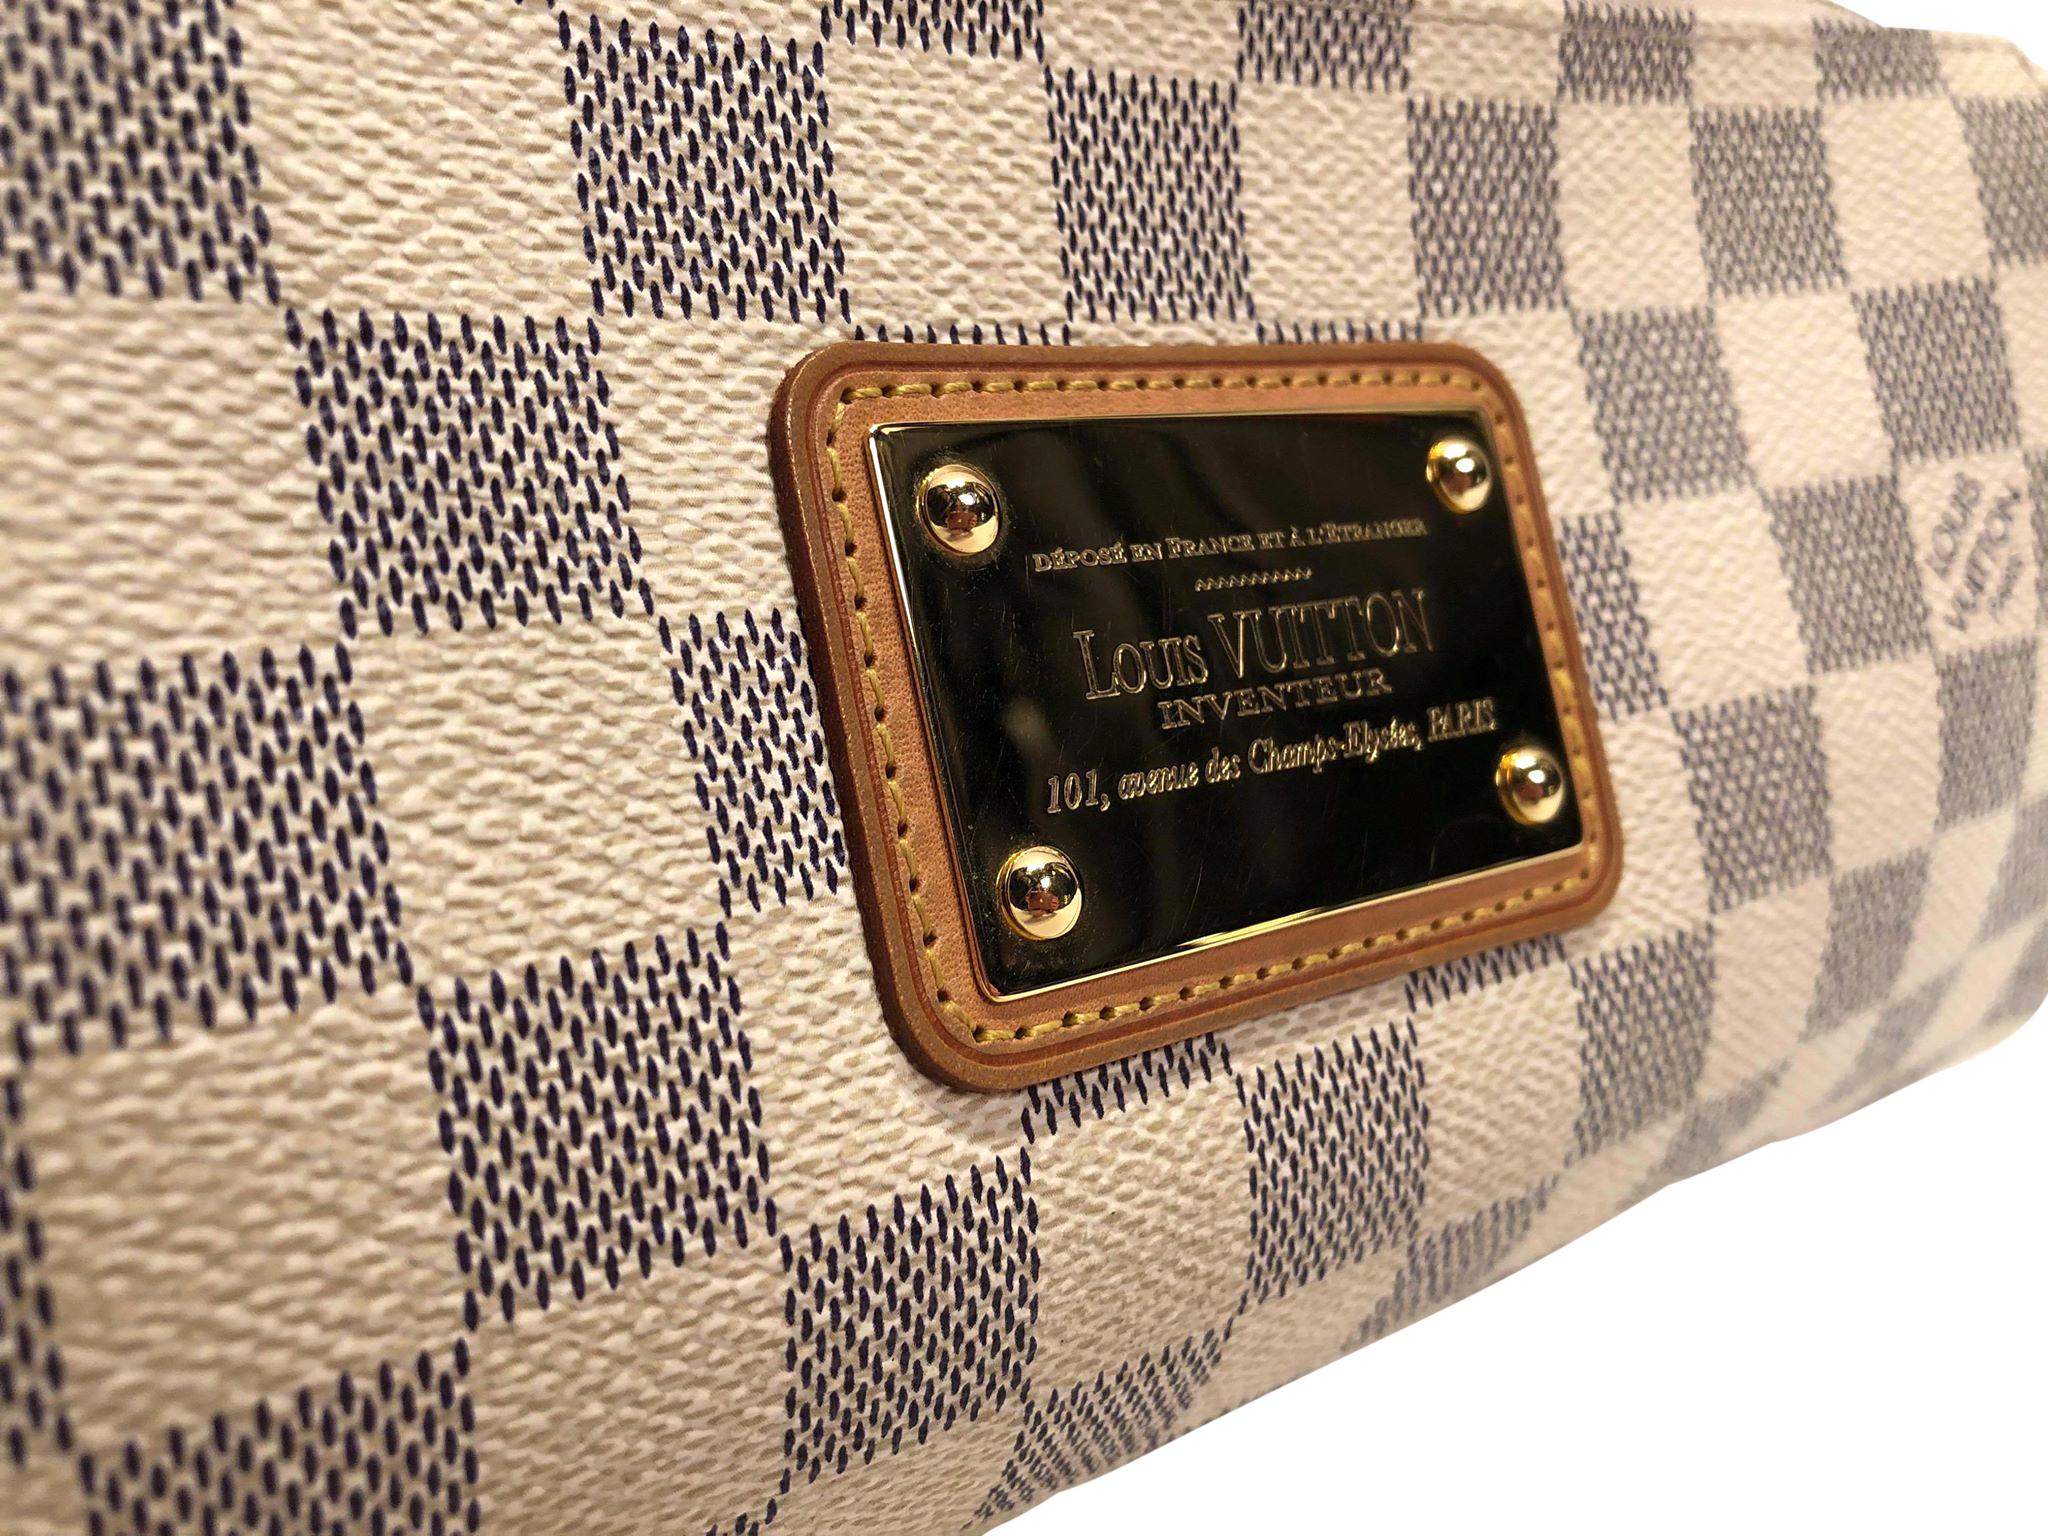 Louis Vuitton Eva Pochette in iconic Damier Azur coated canvas with beige canvas interior. This petit handbag features vachetta leather trimming, gold toned harware, including front and centre logo placard, and an optional small chain link shoulder